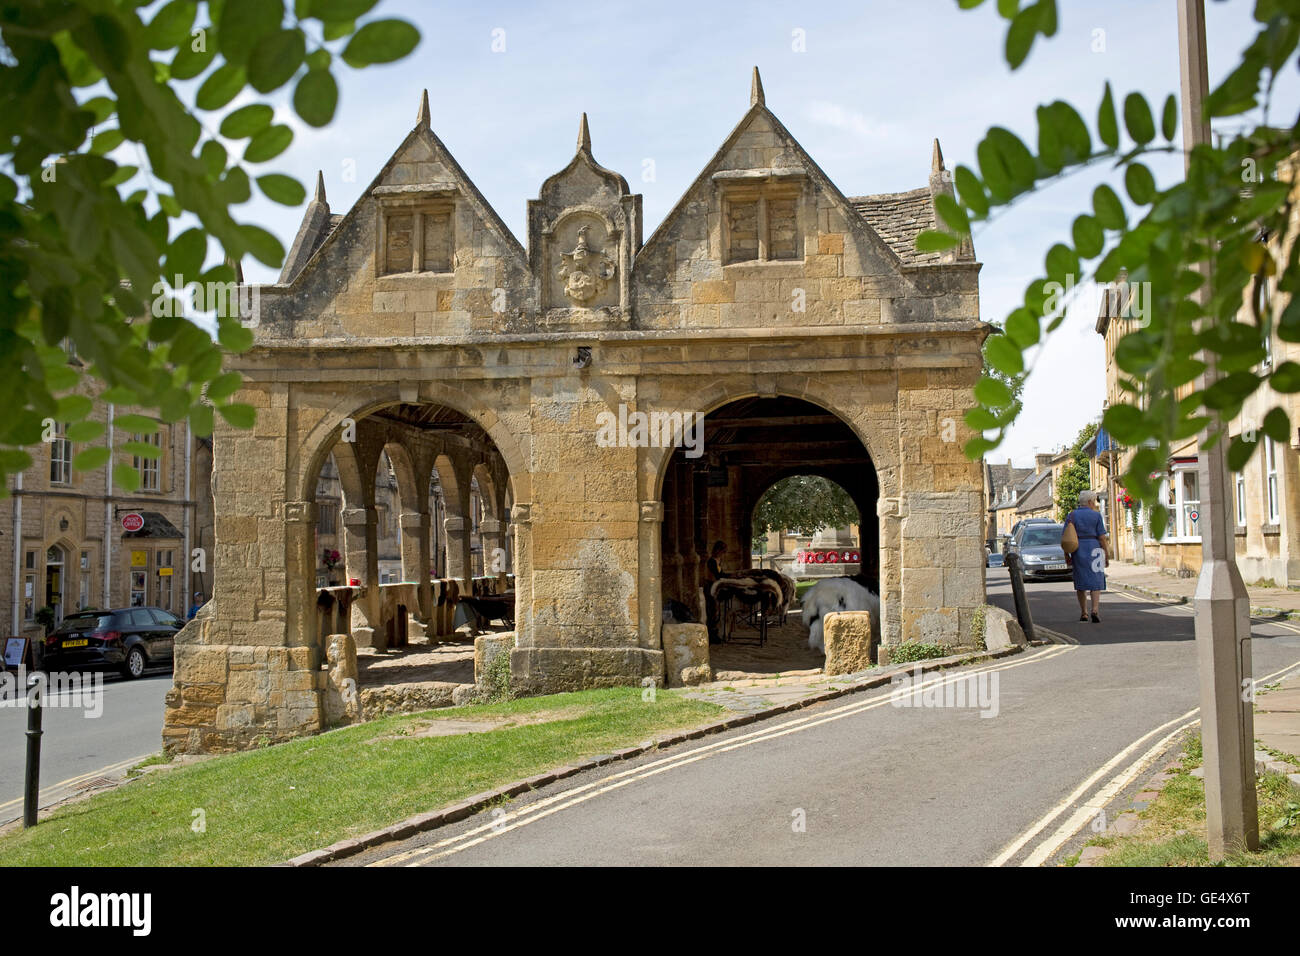 Cotswold stone market hall Chipping Campden erected in 1627 Cotswolds UK Stock Photo